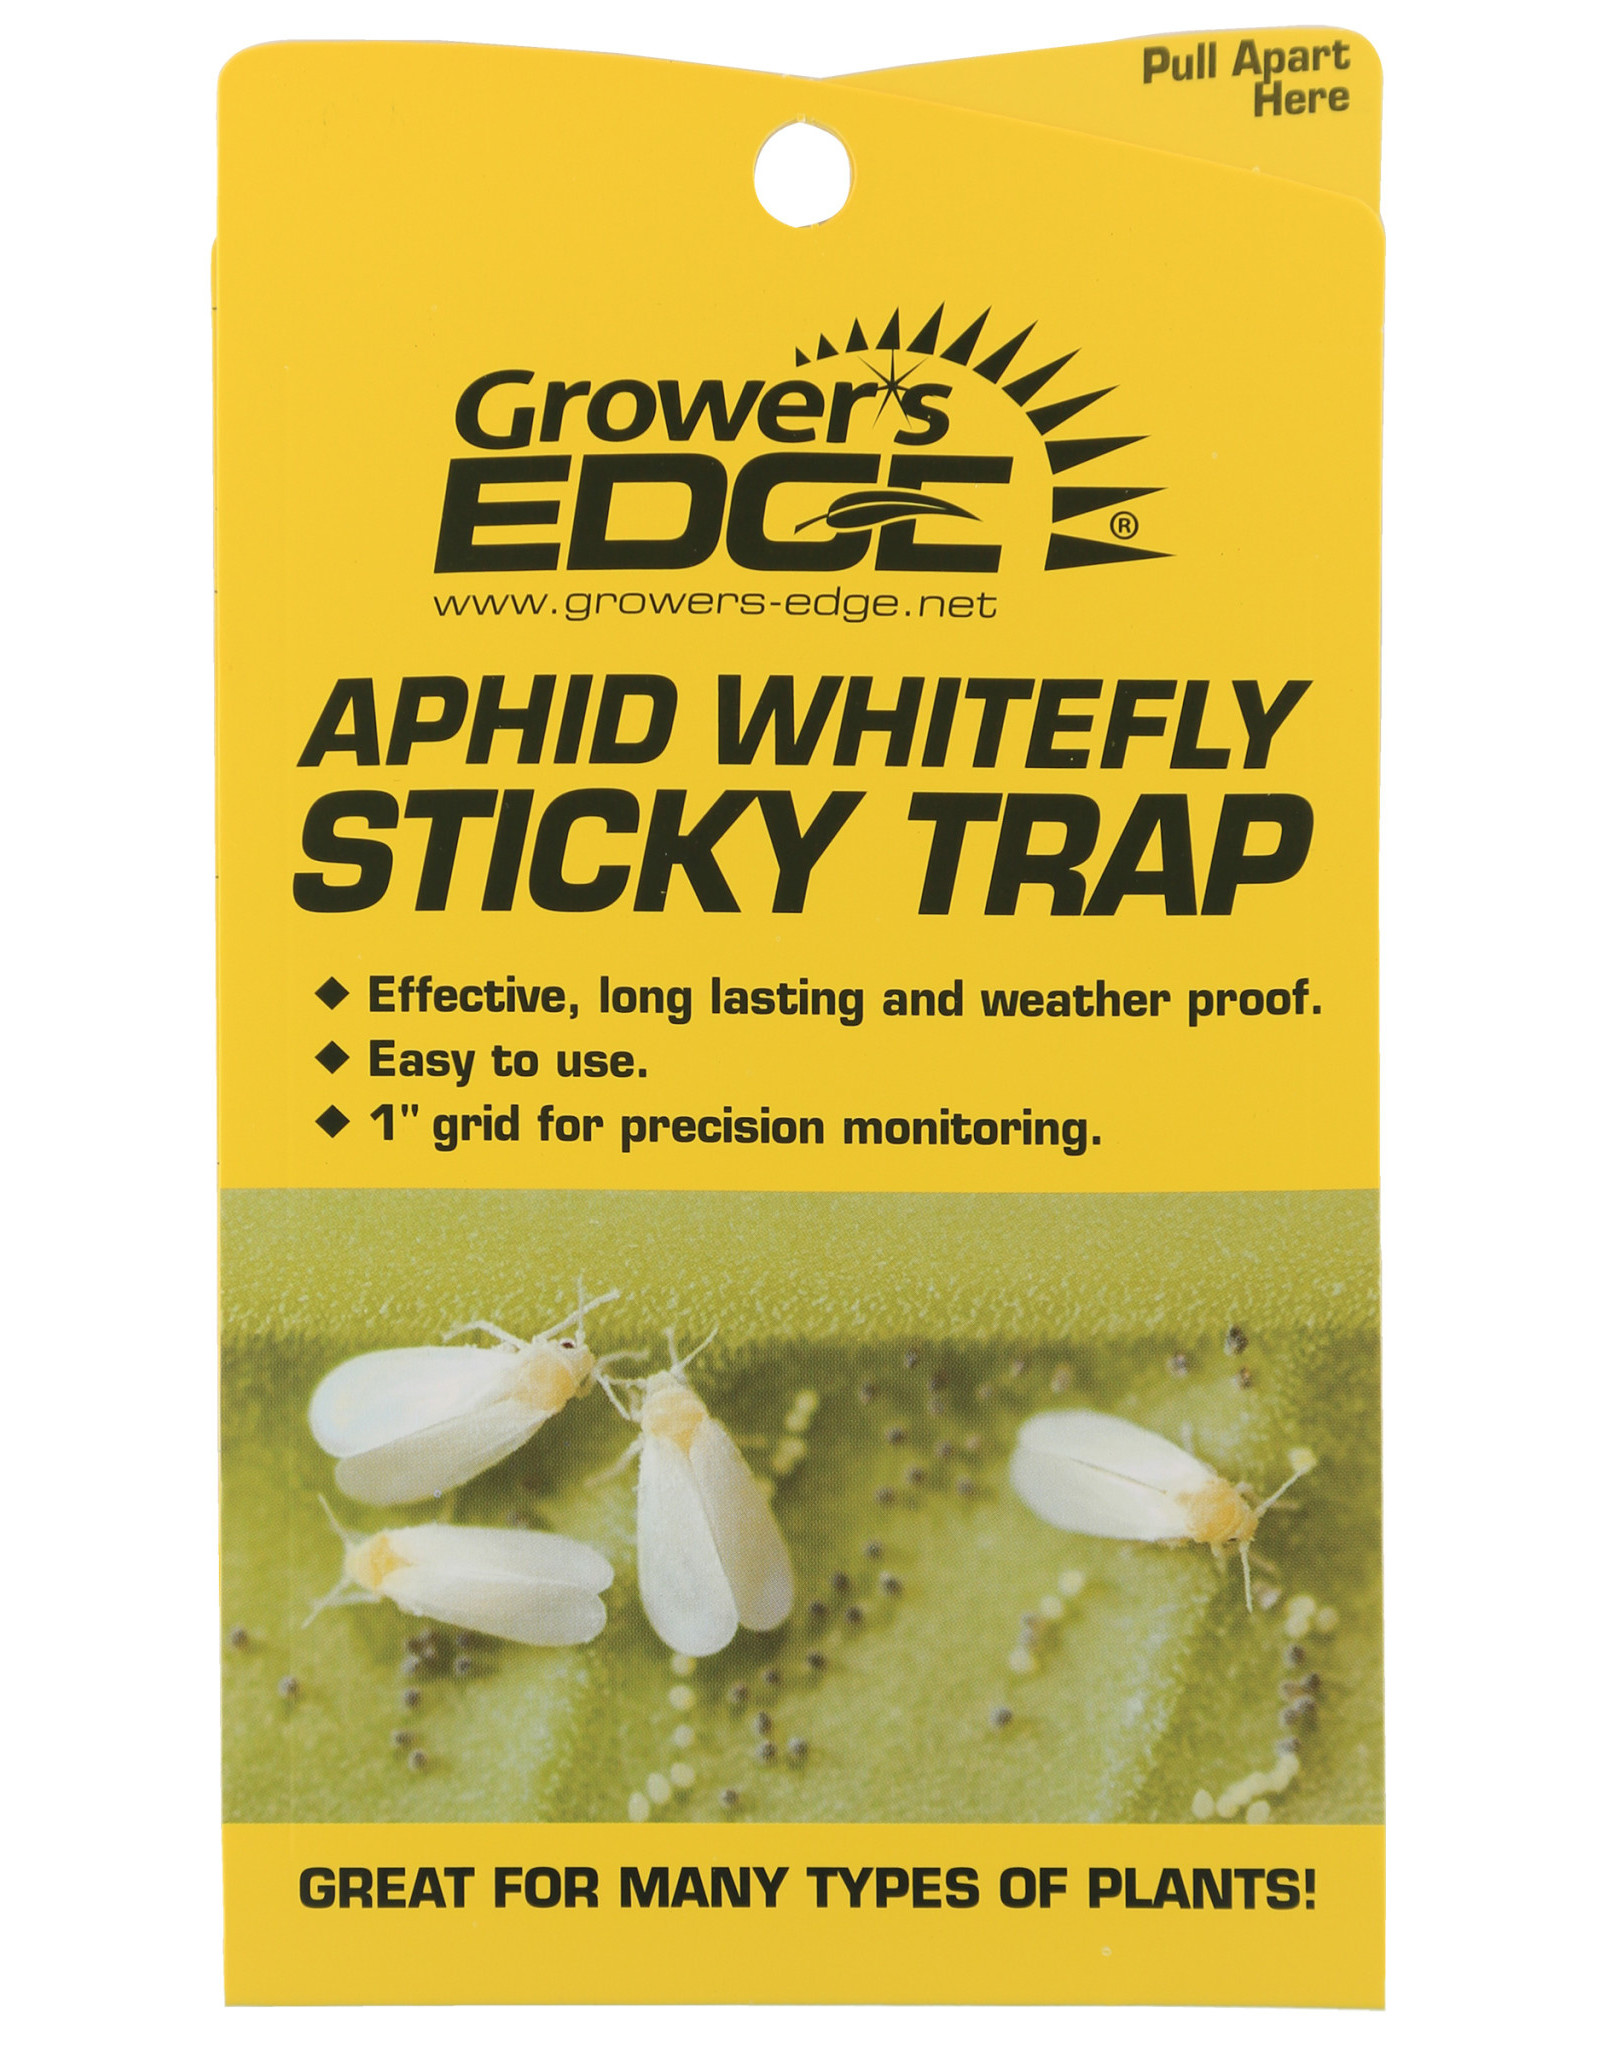 Growers Edge Growers Edge Yellow Sticky Trap Aphid Whitefly Traps 5 pack